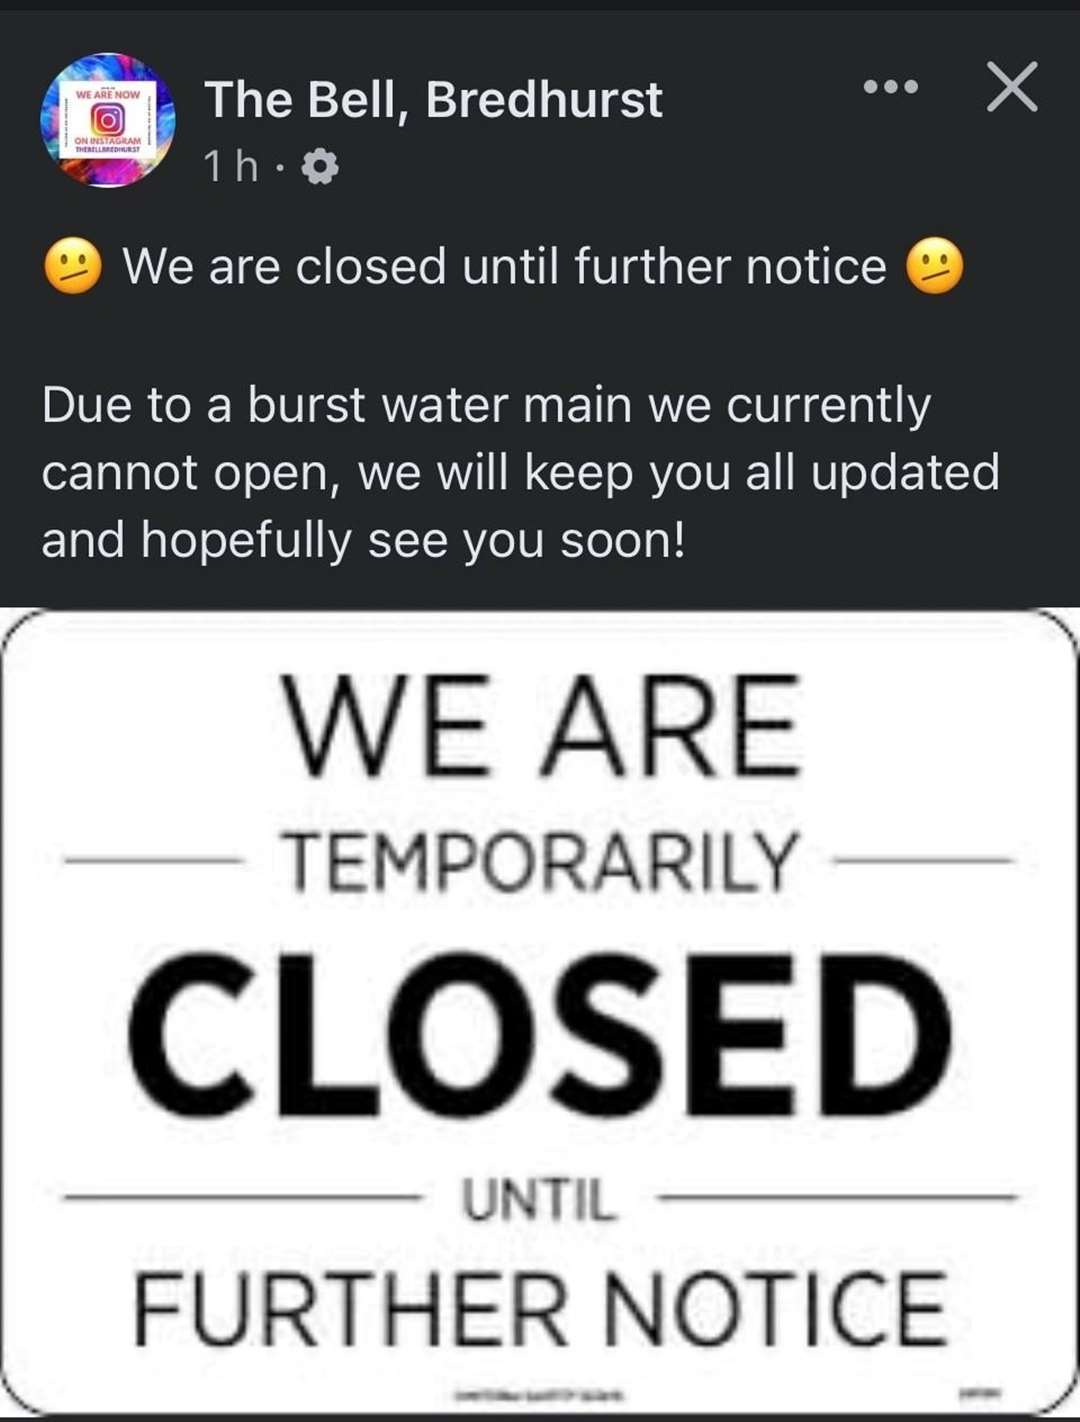 The Bell pub at Bredhurst has also been closed by the water main burst. Picture: Facebook